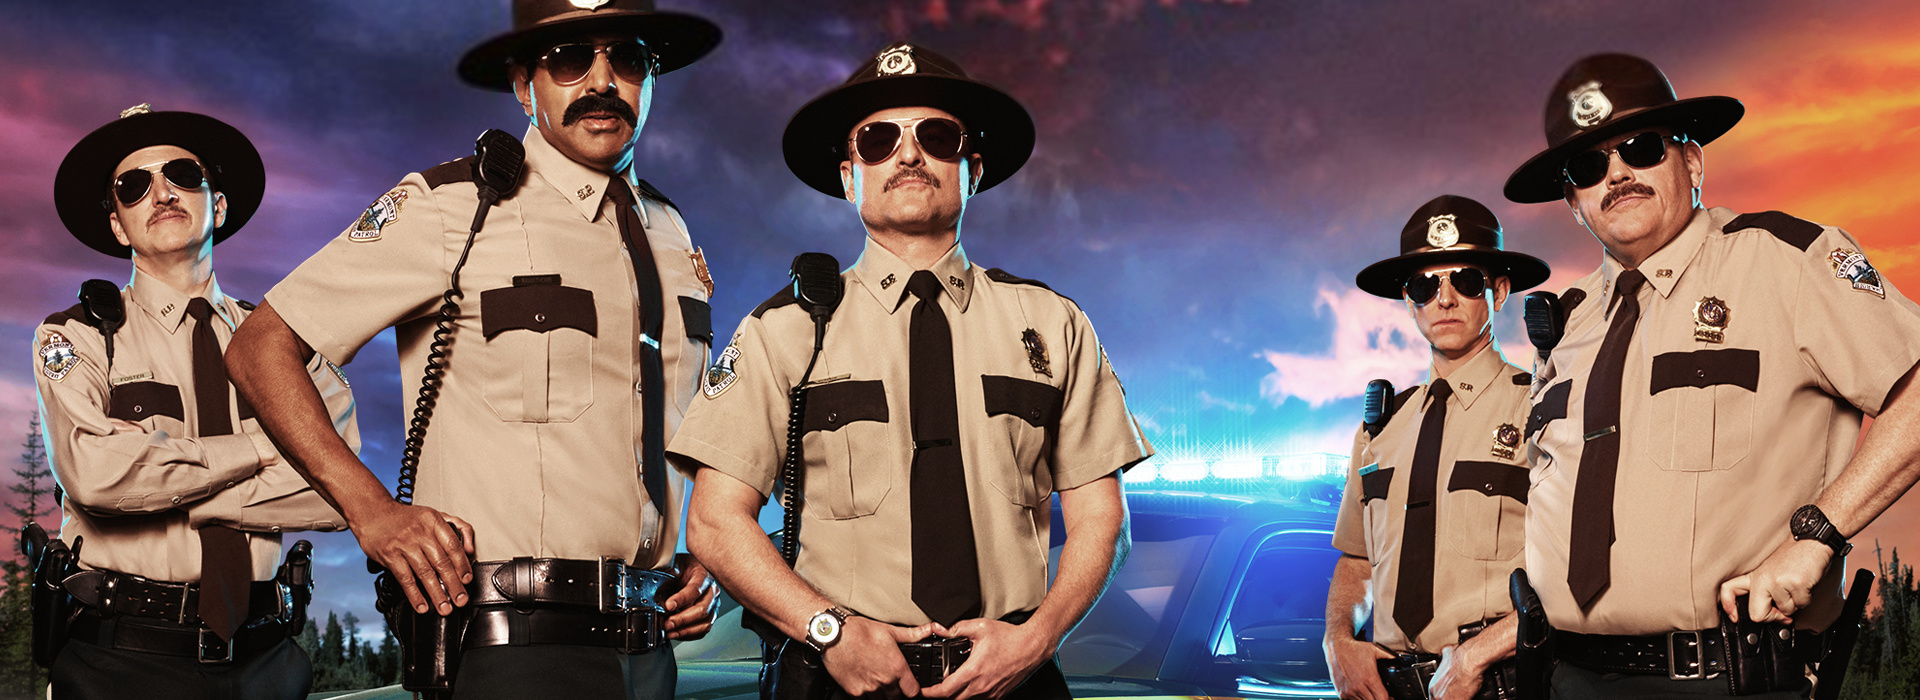 Movie poster Super Troopers 2